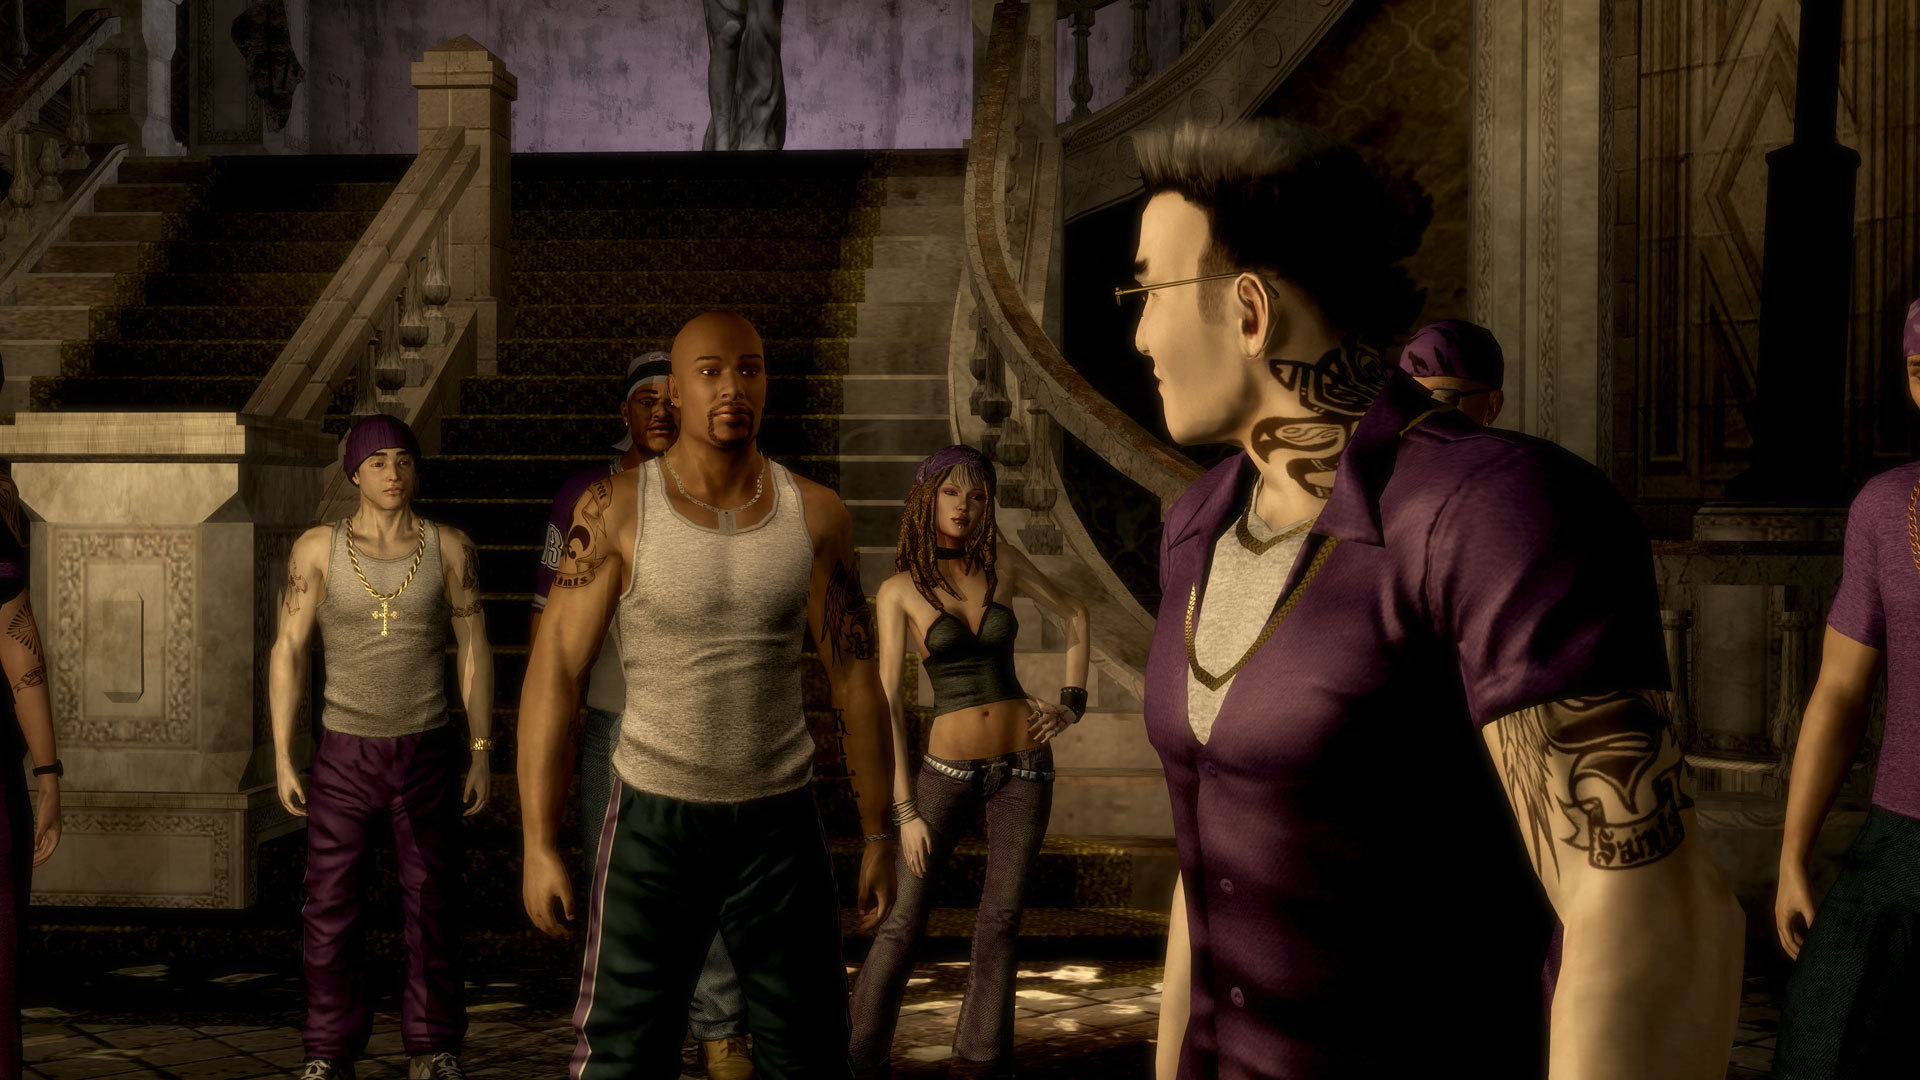 Saints Row 2 Cheats All The Cellphone Cheat Codes You Need To Completely Dominate Stilwater Gamesradar